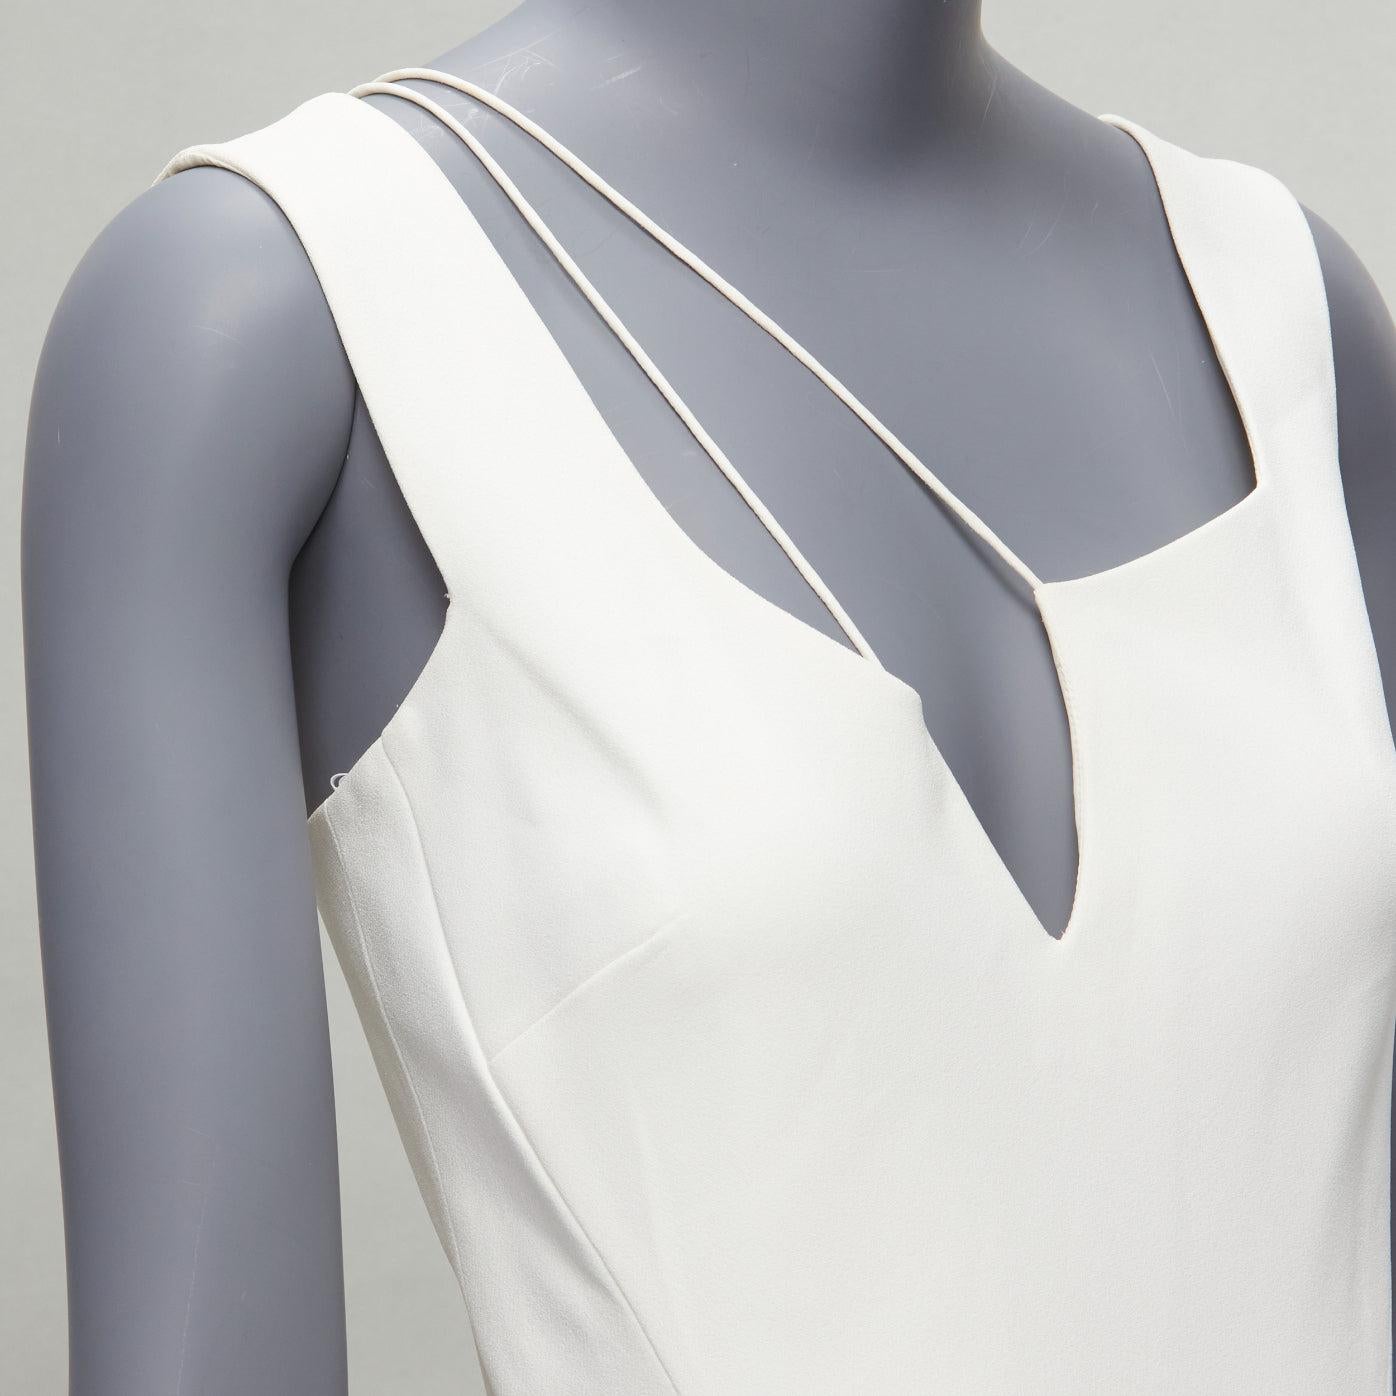 VICTORIA BECKHAM white asymmetric straps bias cut A-line knee dress UK8 S
Reference: KEDG/A00270
Brand: Victoria Beckham
Designer: Victoria Beckham
Material: Acetate, Viscose
Color: White
Pattern: Solid
Closure: Zip
Lining: White Fabric
Extra